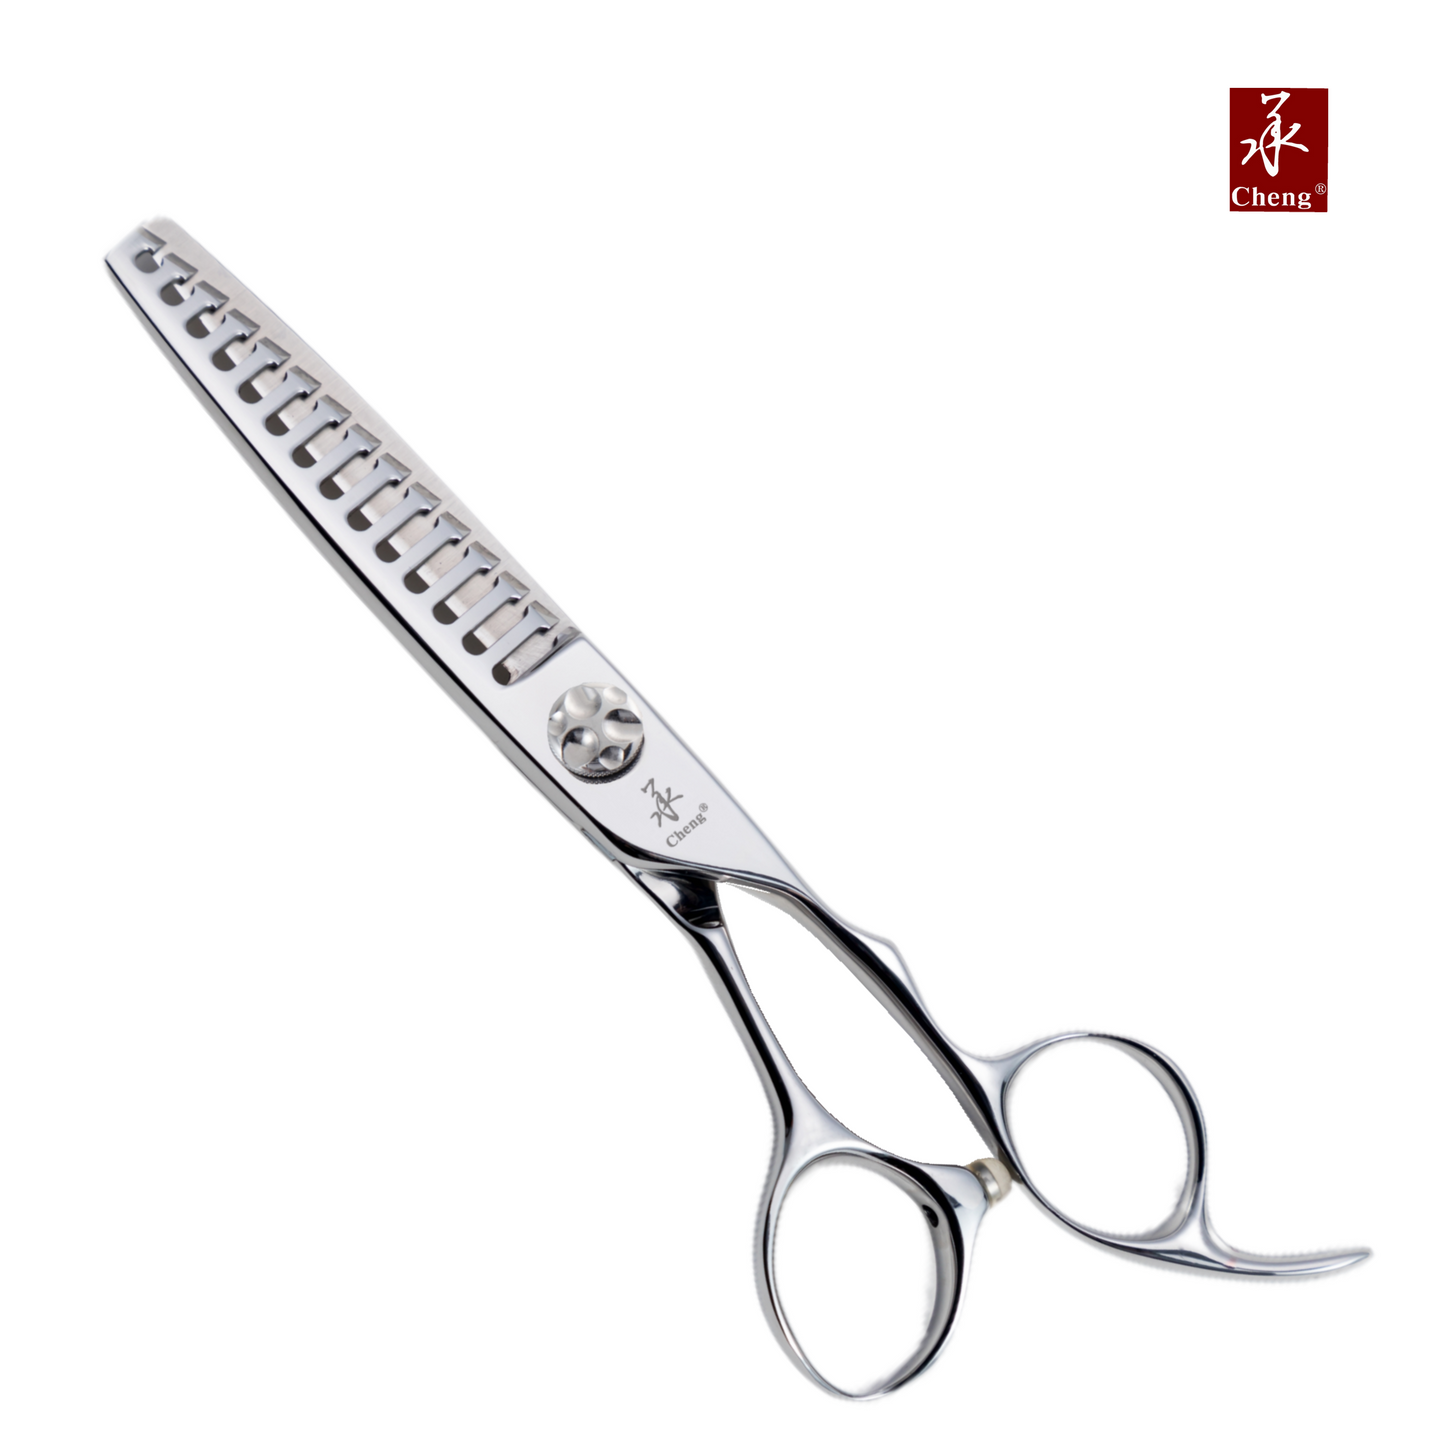 KR-623TZ  Hair Thinning Scissors 6 Inch 23T About=25%~30%